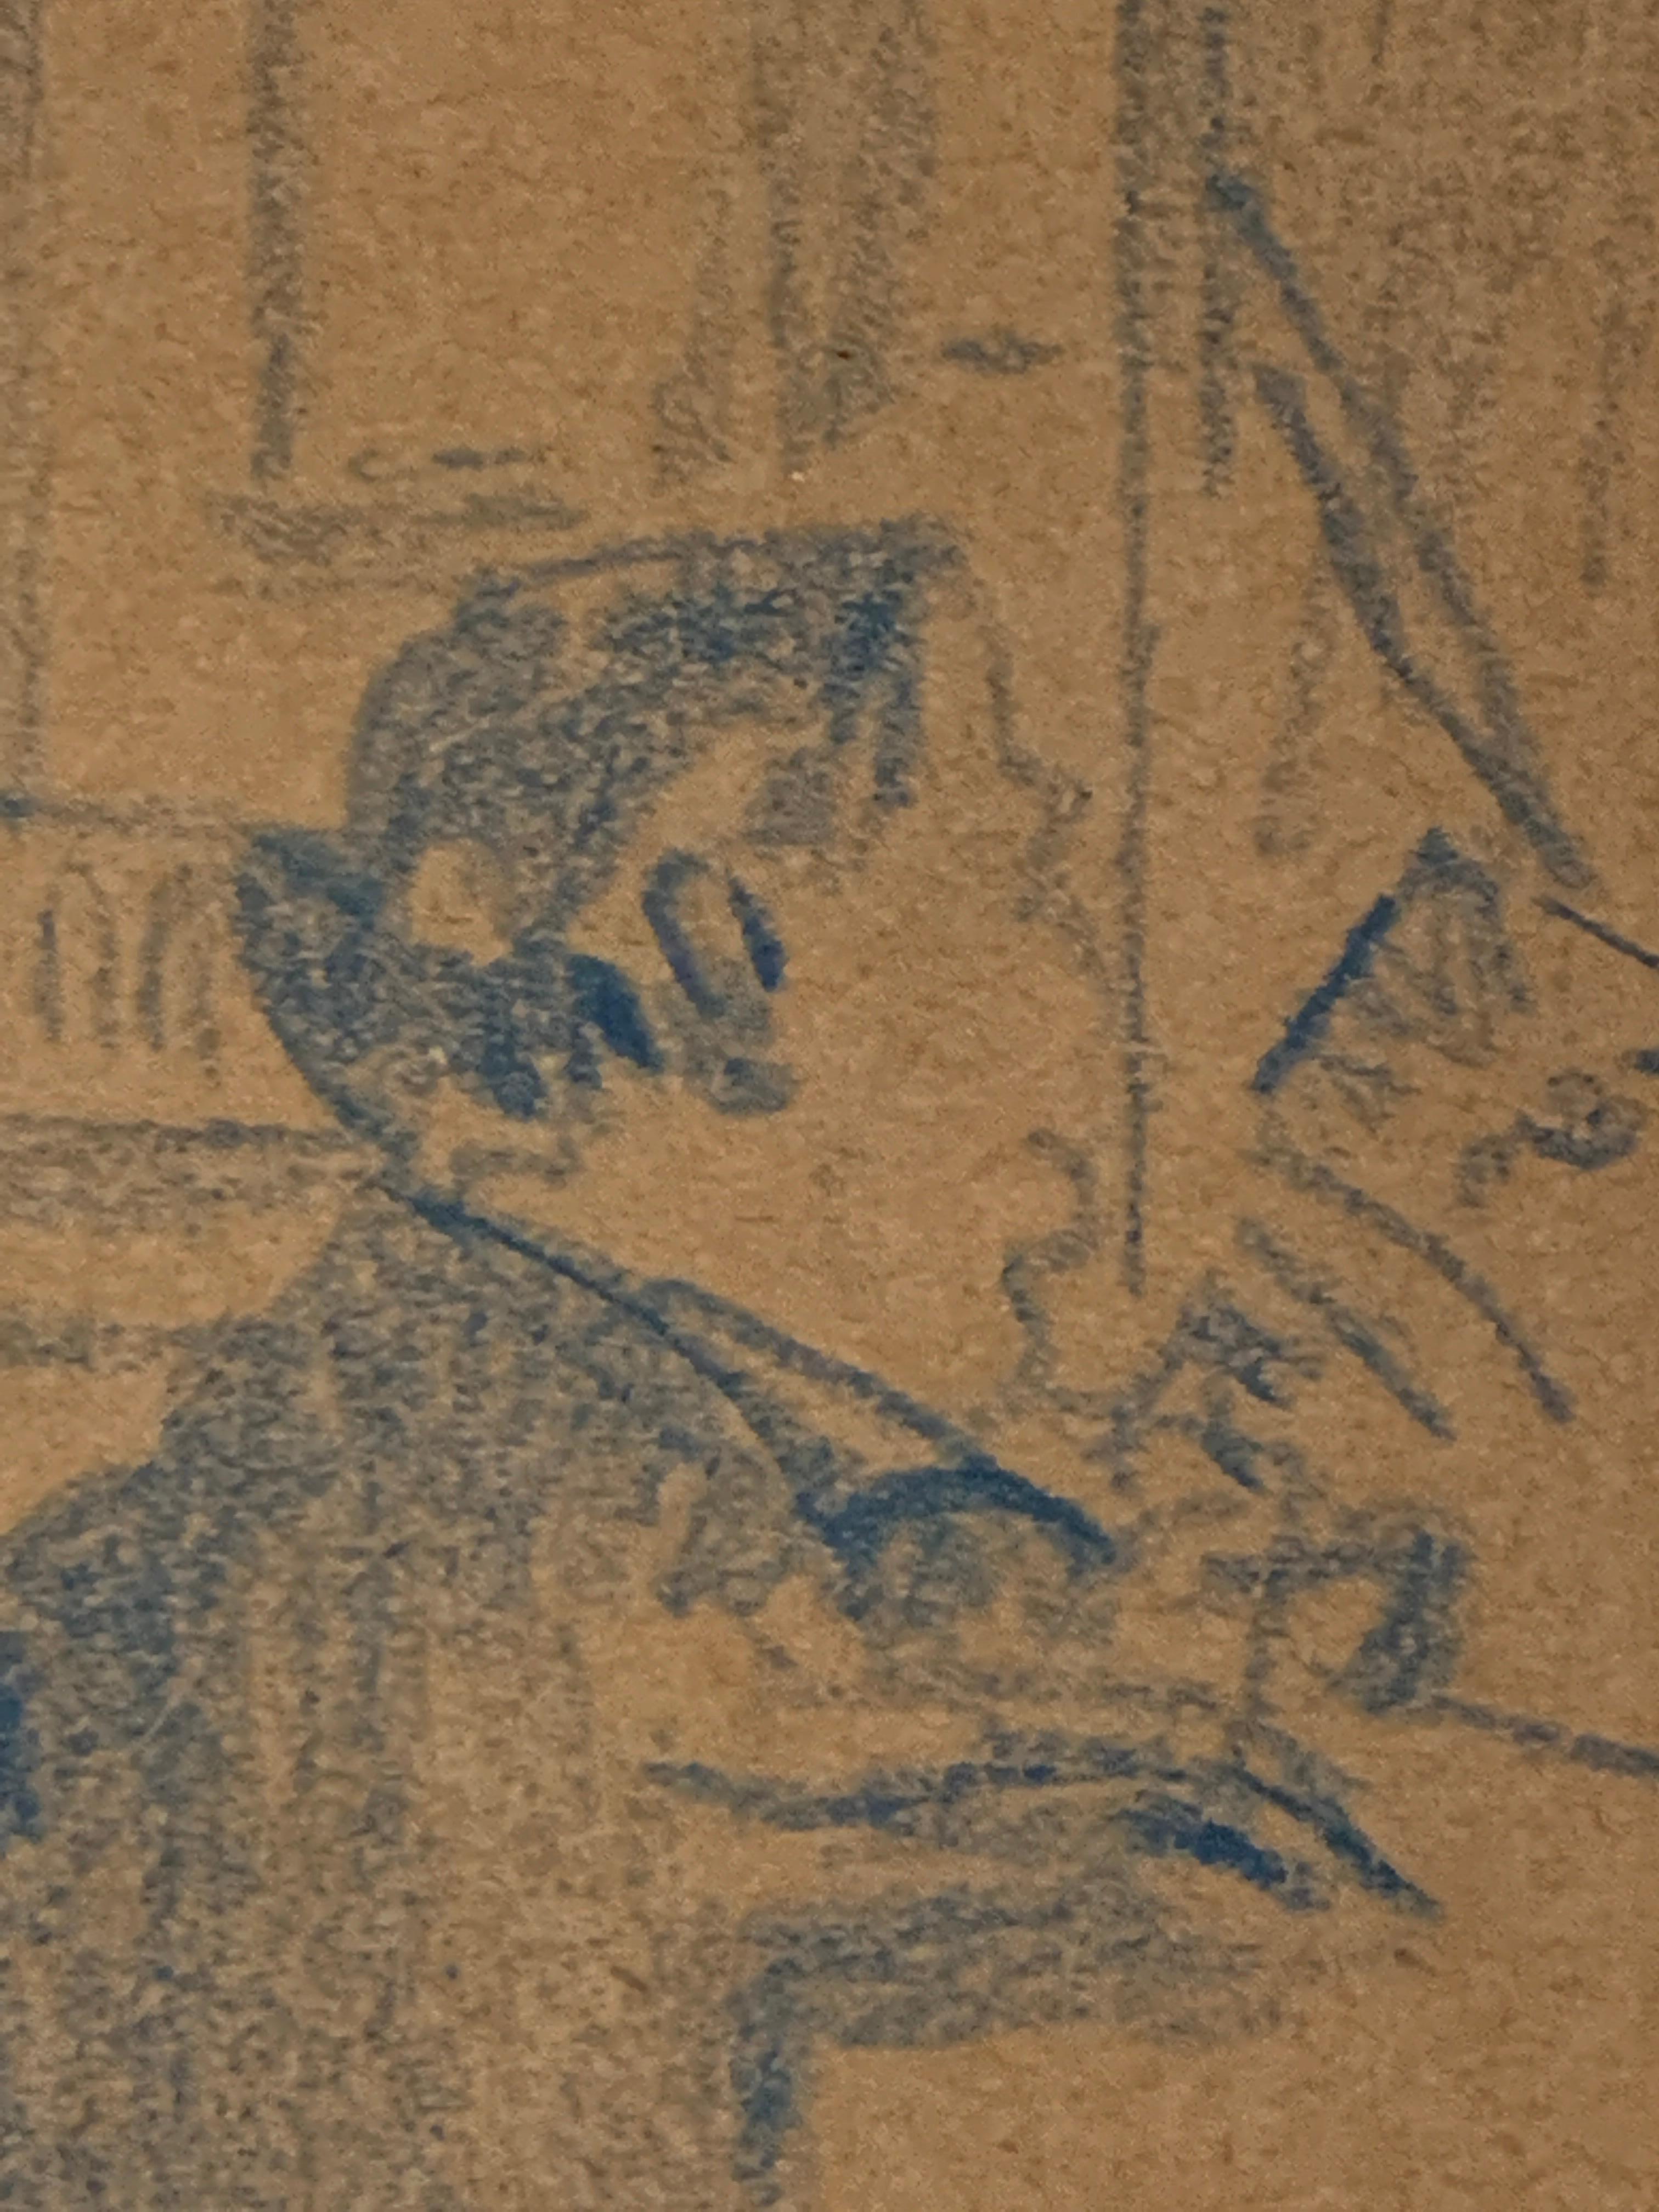 walter sickert paintings for sale